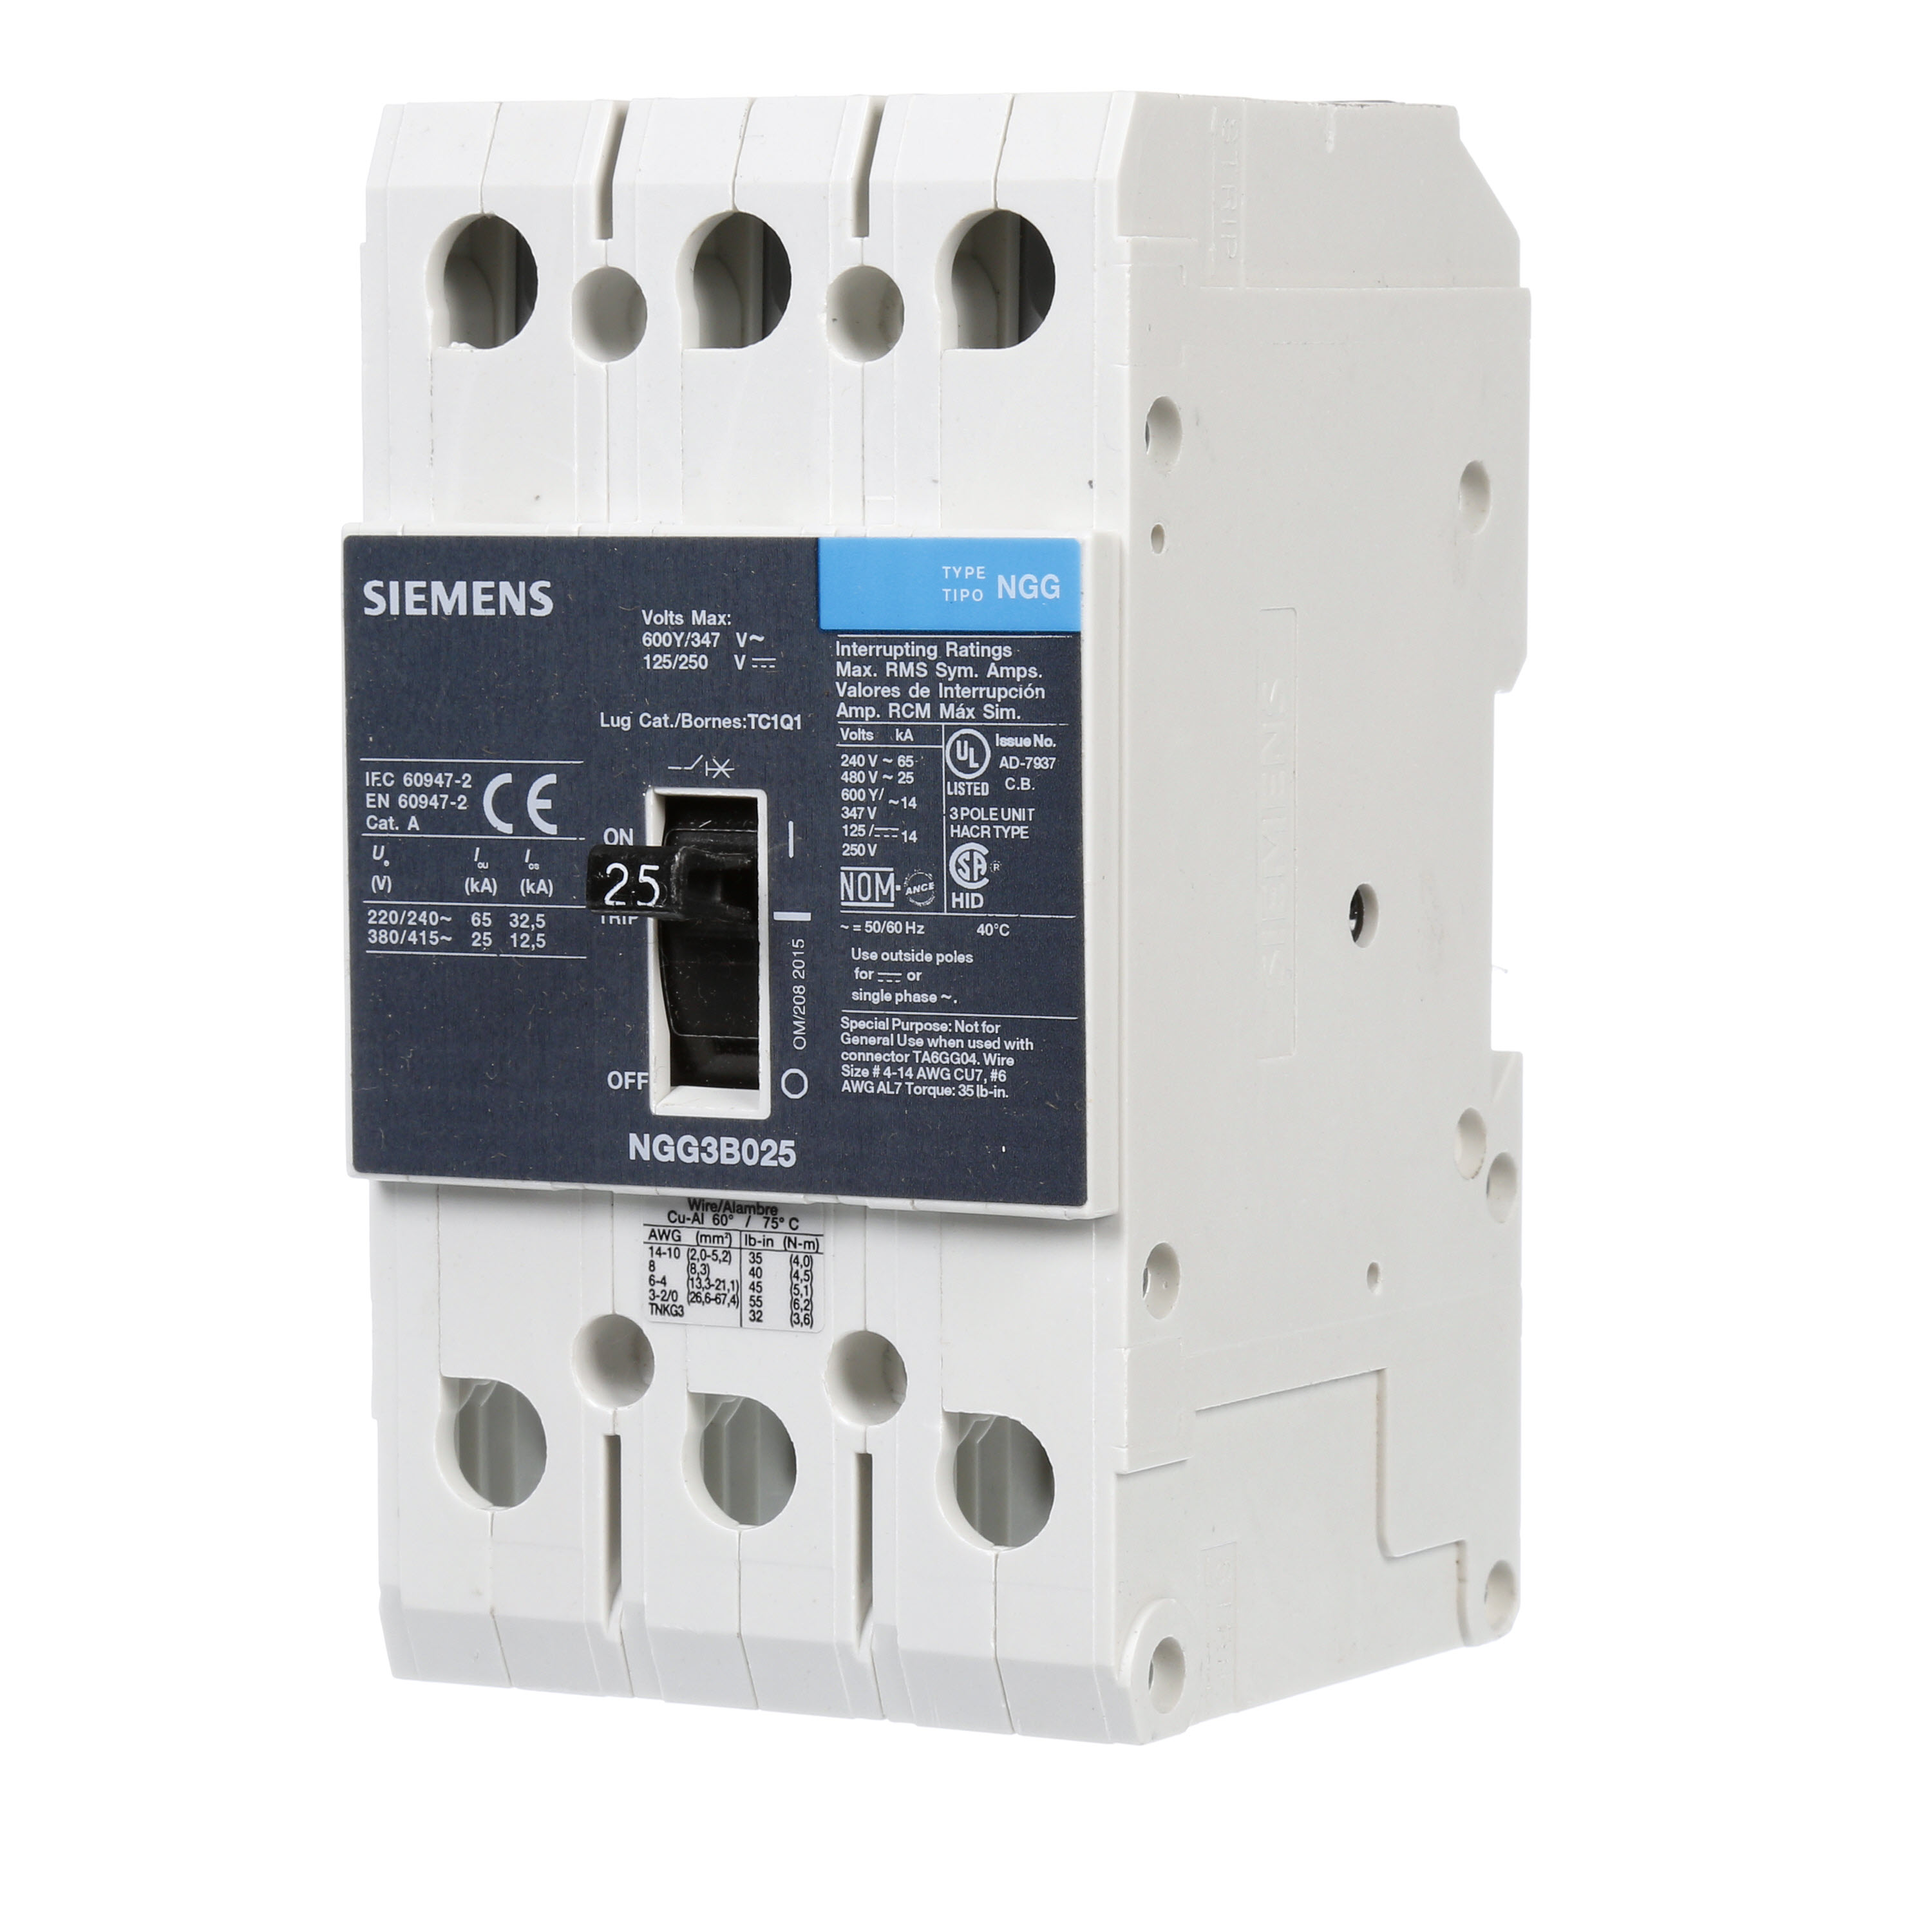 SIEMENS LOW VOLTAGE G FRAME CIRCUIT BREAKER WITH THERMAL - MAGNETIC TRIP. UL LISTED NGG FRAME WITH STANDARD BREAKING CAPACITY. 25A 3-POLE (14KAIC AT 600Y/347V)(25KAIC AT 480V). SPECIAL FEATURES MOUNTS ON DIN RAIL / SCREW, LINE AND LOAD SIDE LUGS (TC1Q1) WIRE RANGE 14 - 10 AWS (CU/AL). DIMENSIONS (W x H x D) IN 3 x 5.4 x 2.8.